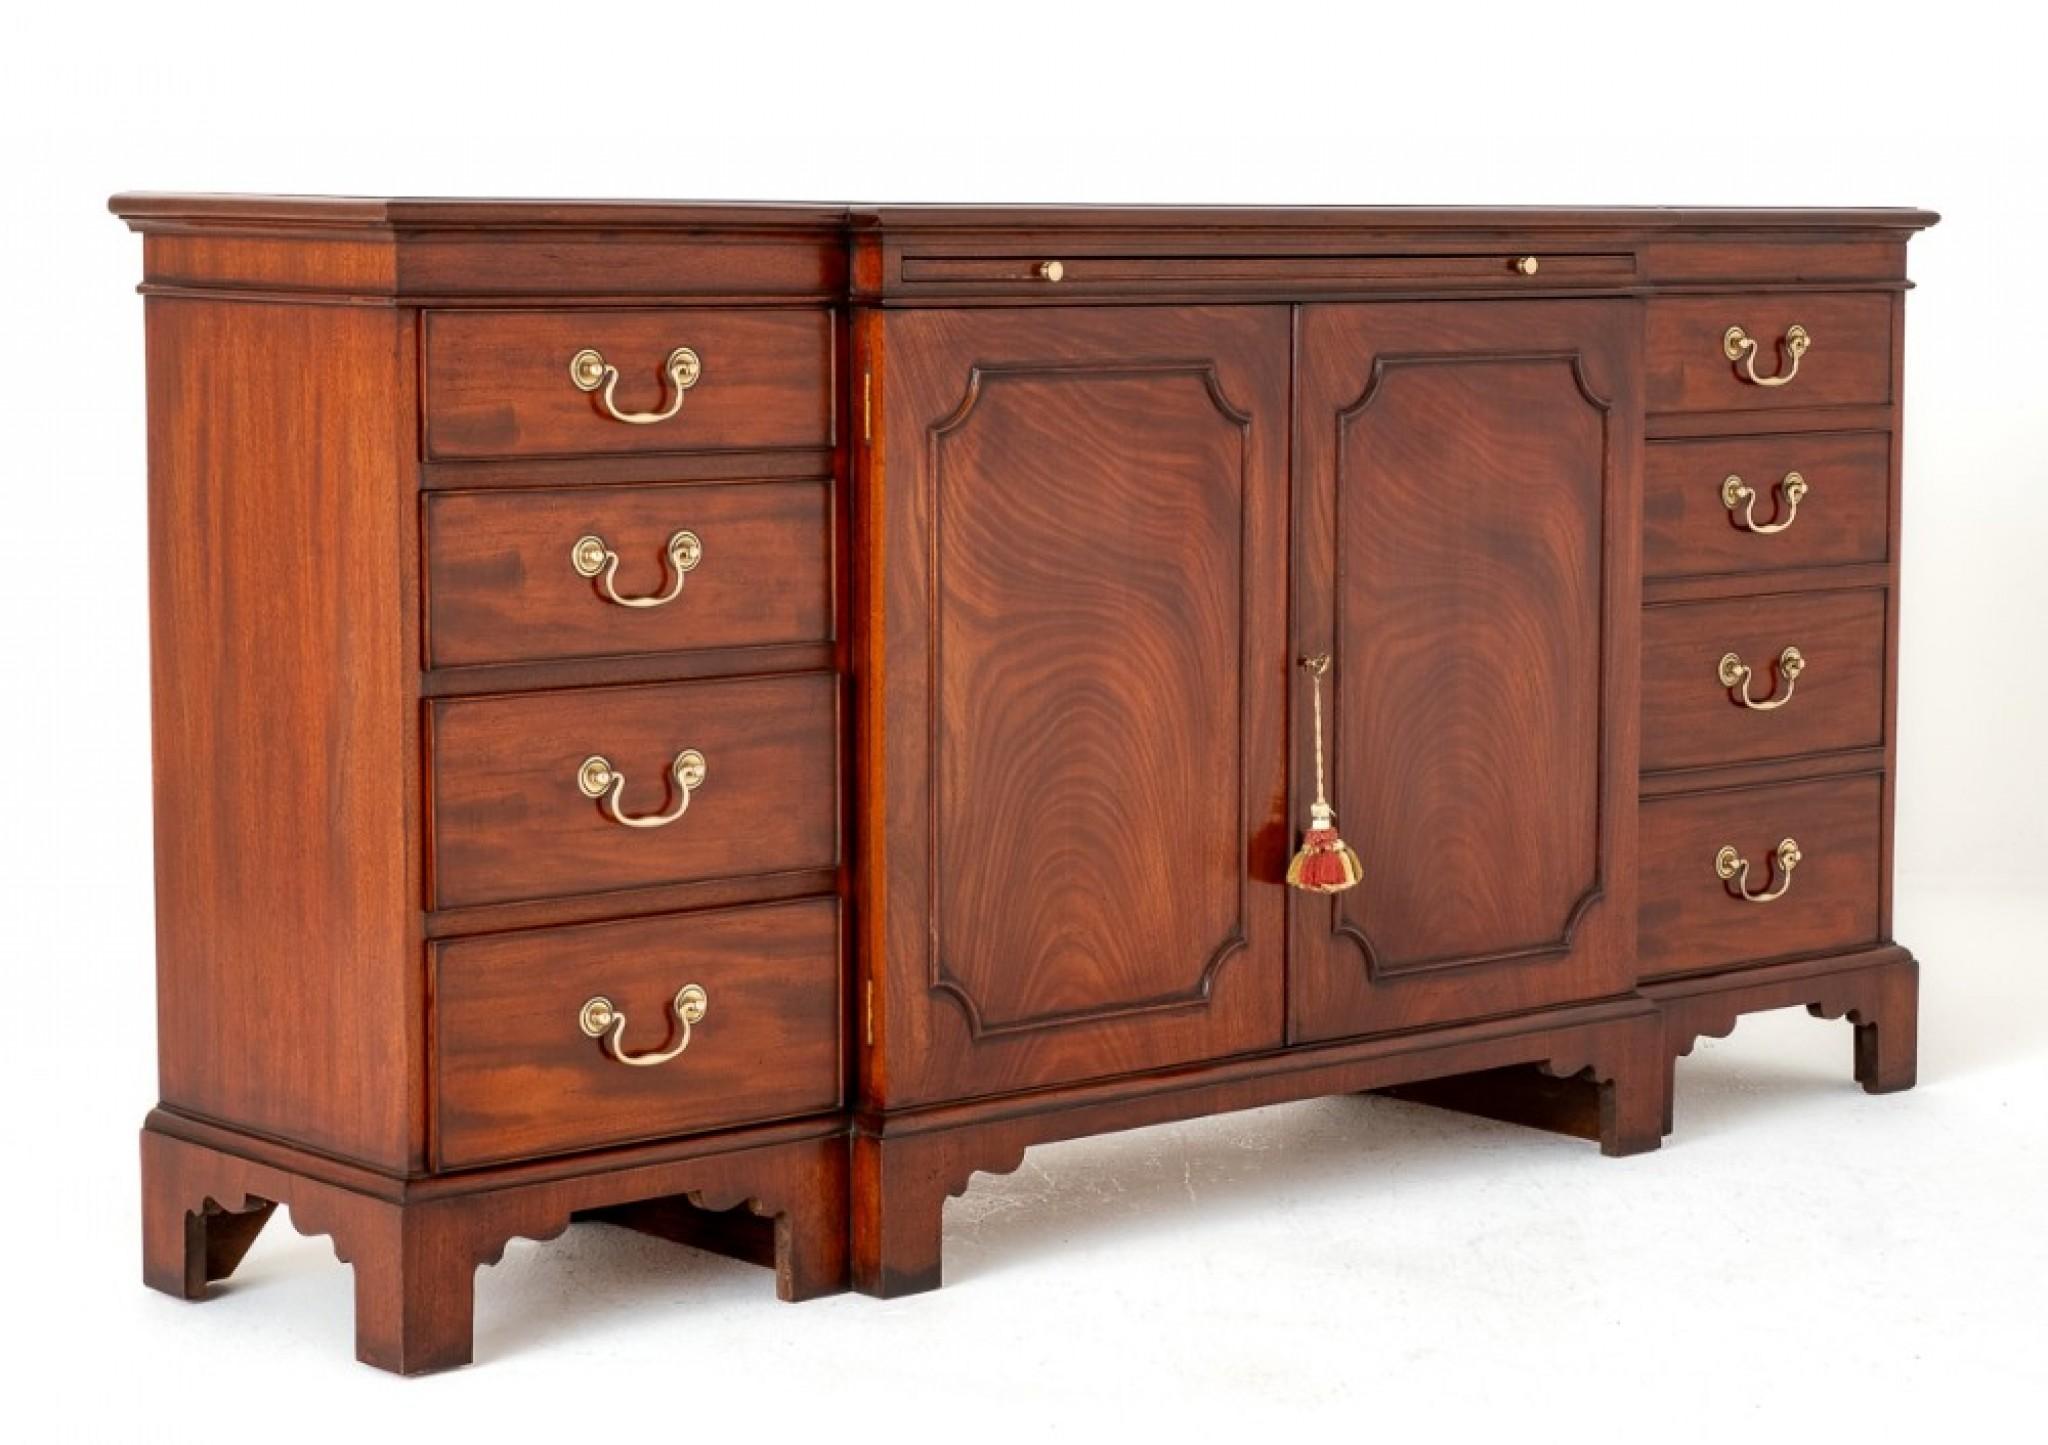 Georgian Revival Mahogany Breakfront Sideboard.
This Impressive Sideboard Stands upon Shaped Bracket Feet.
Having an arrangement of 7 Oak Lined Drawers and a Pullout Slide.
The Drawers Feature Brass Swan Neck Handles.
The Pair of Panelled Central